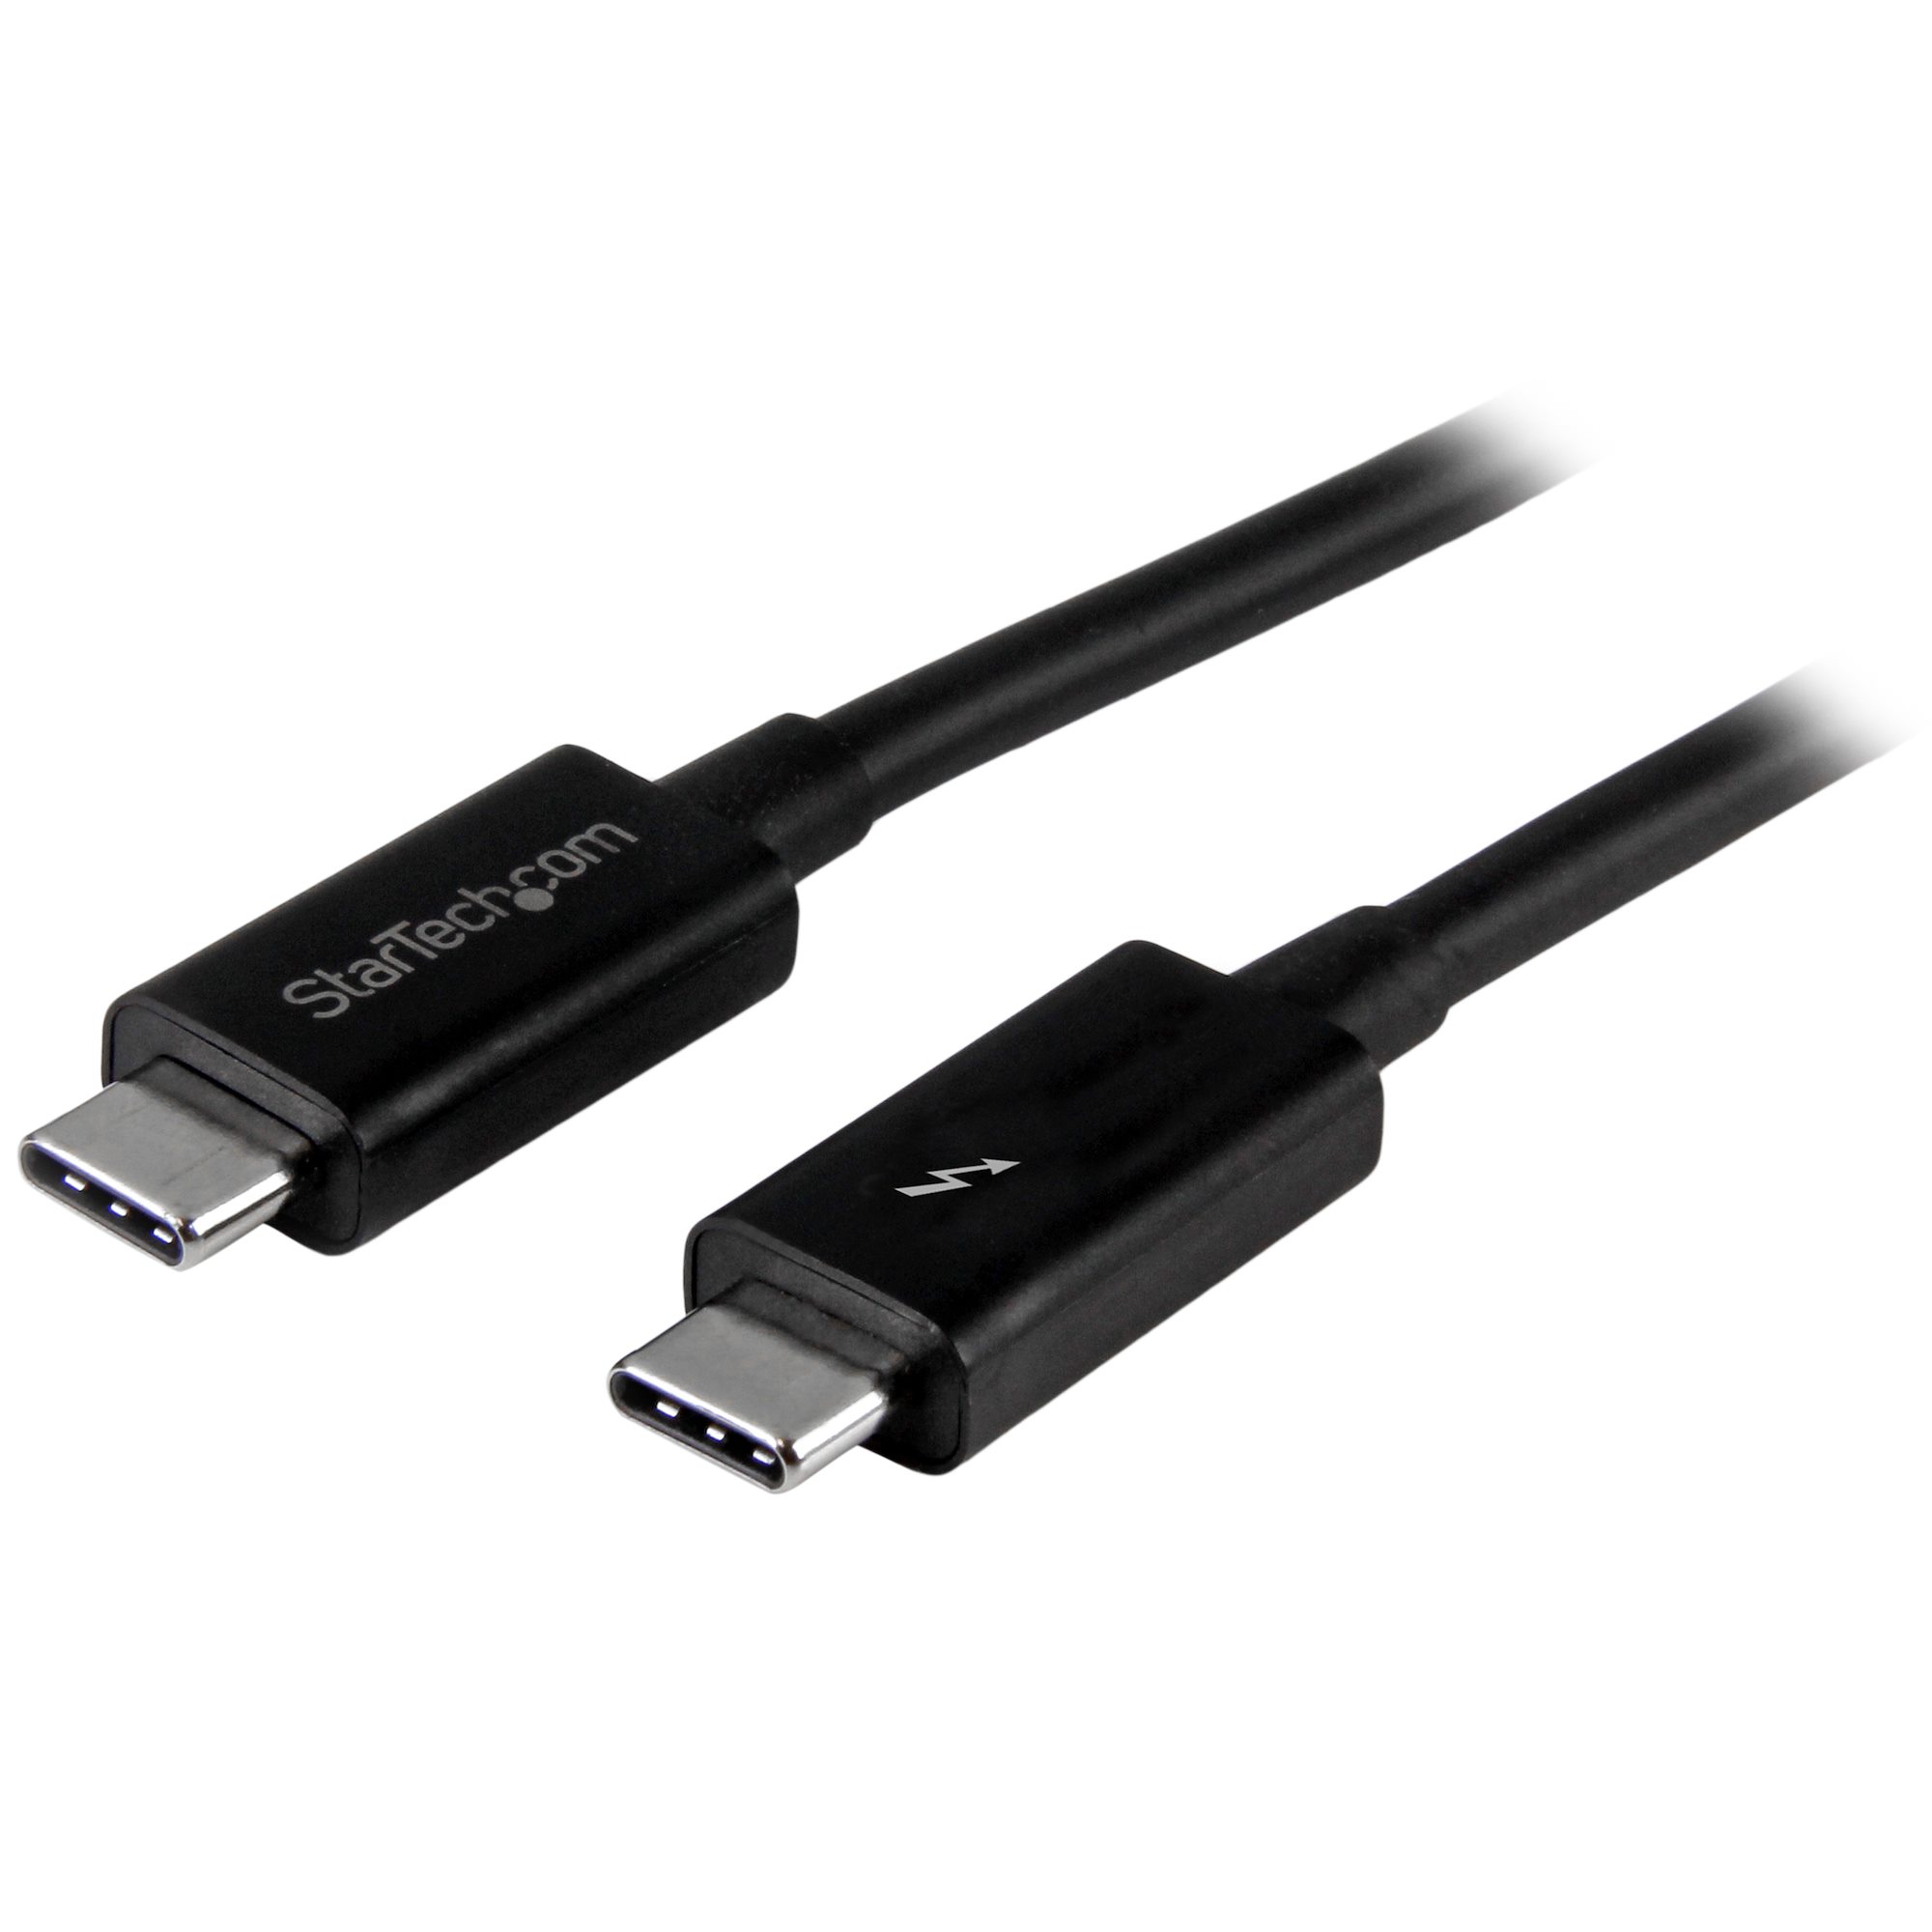 Thunderbolt 3 Cable 1m 20Gbps 3 Cables and Adapters |